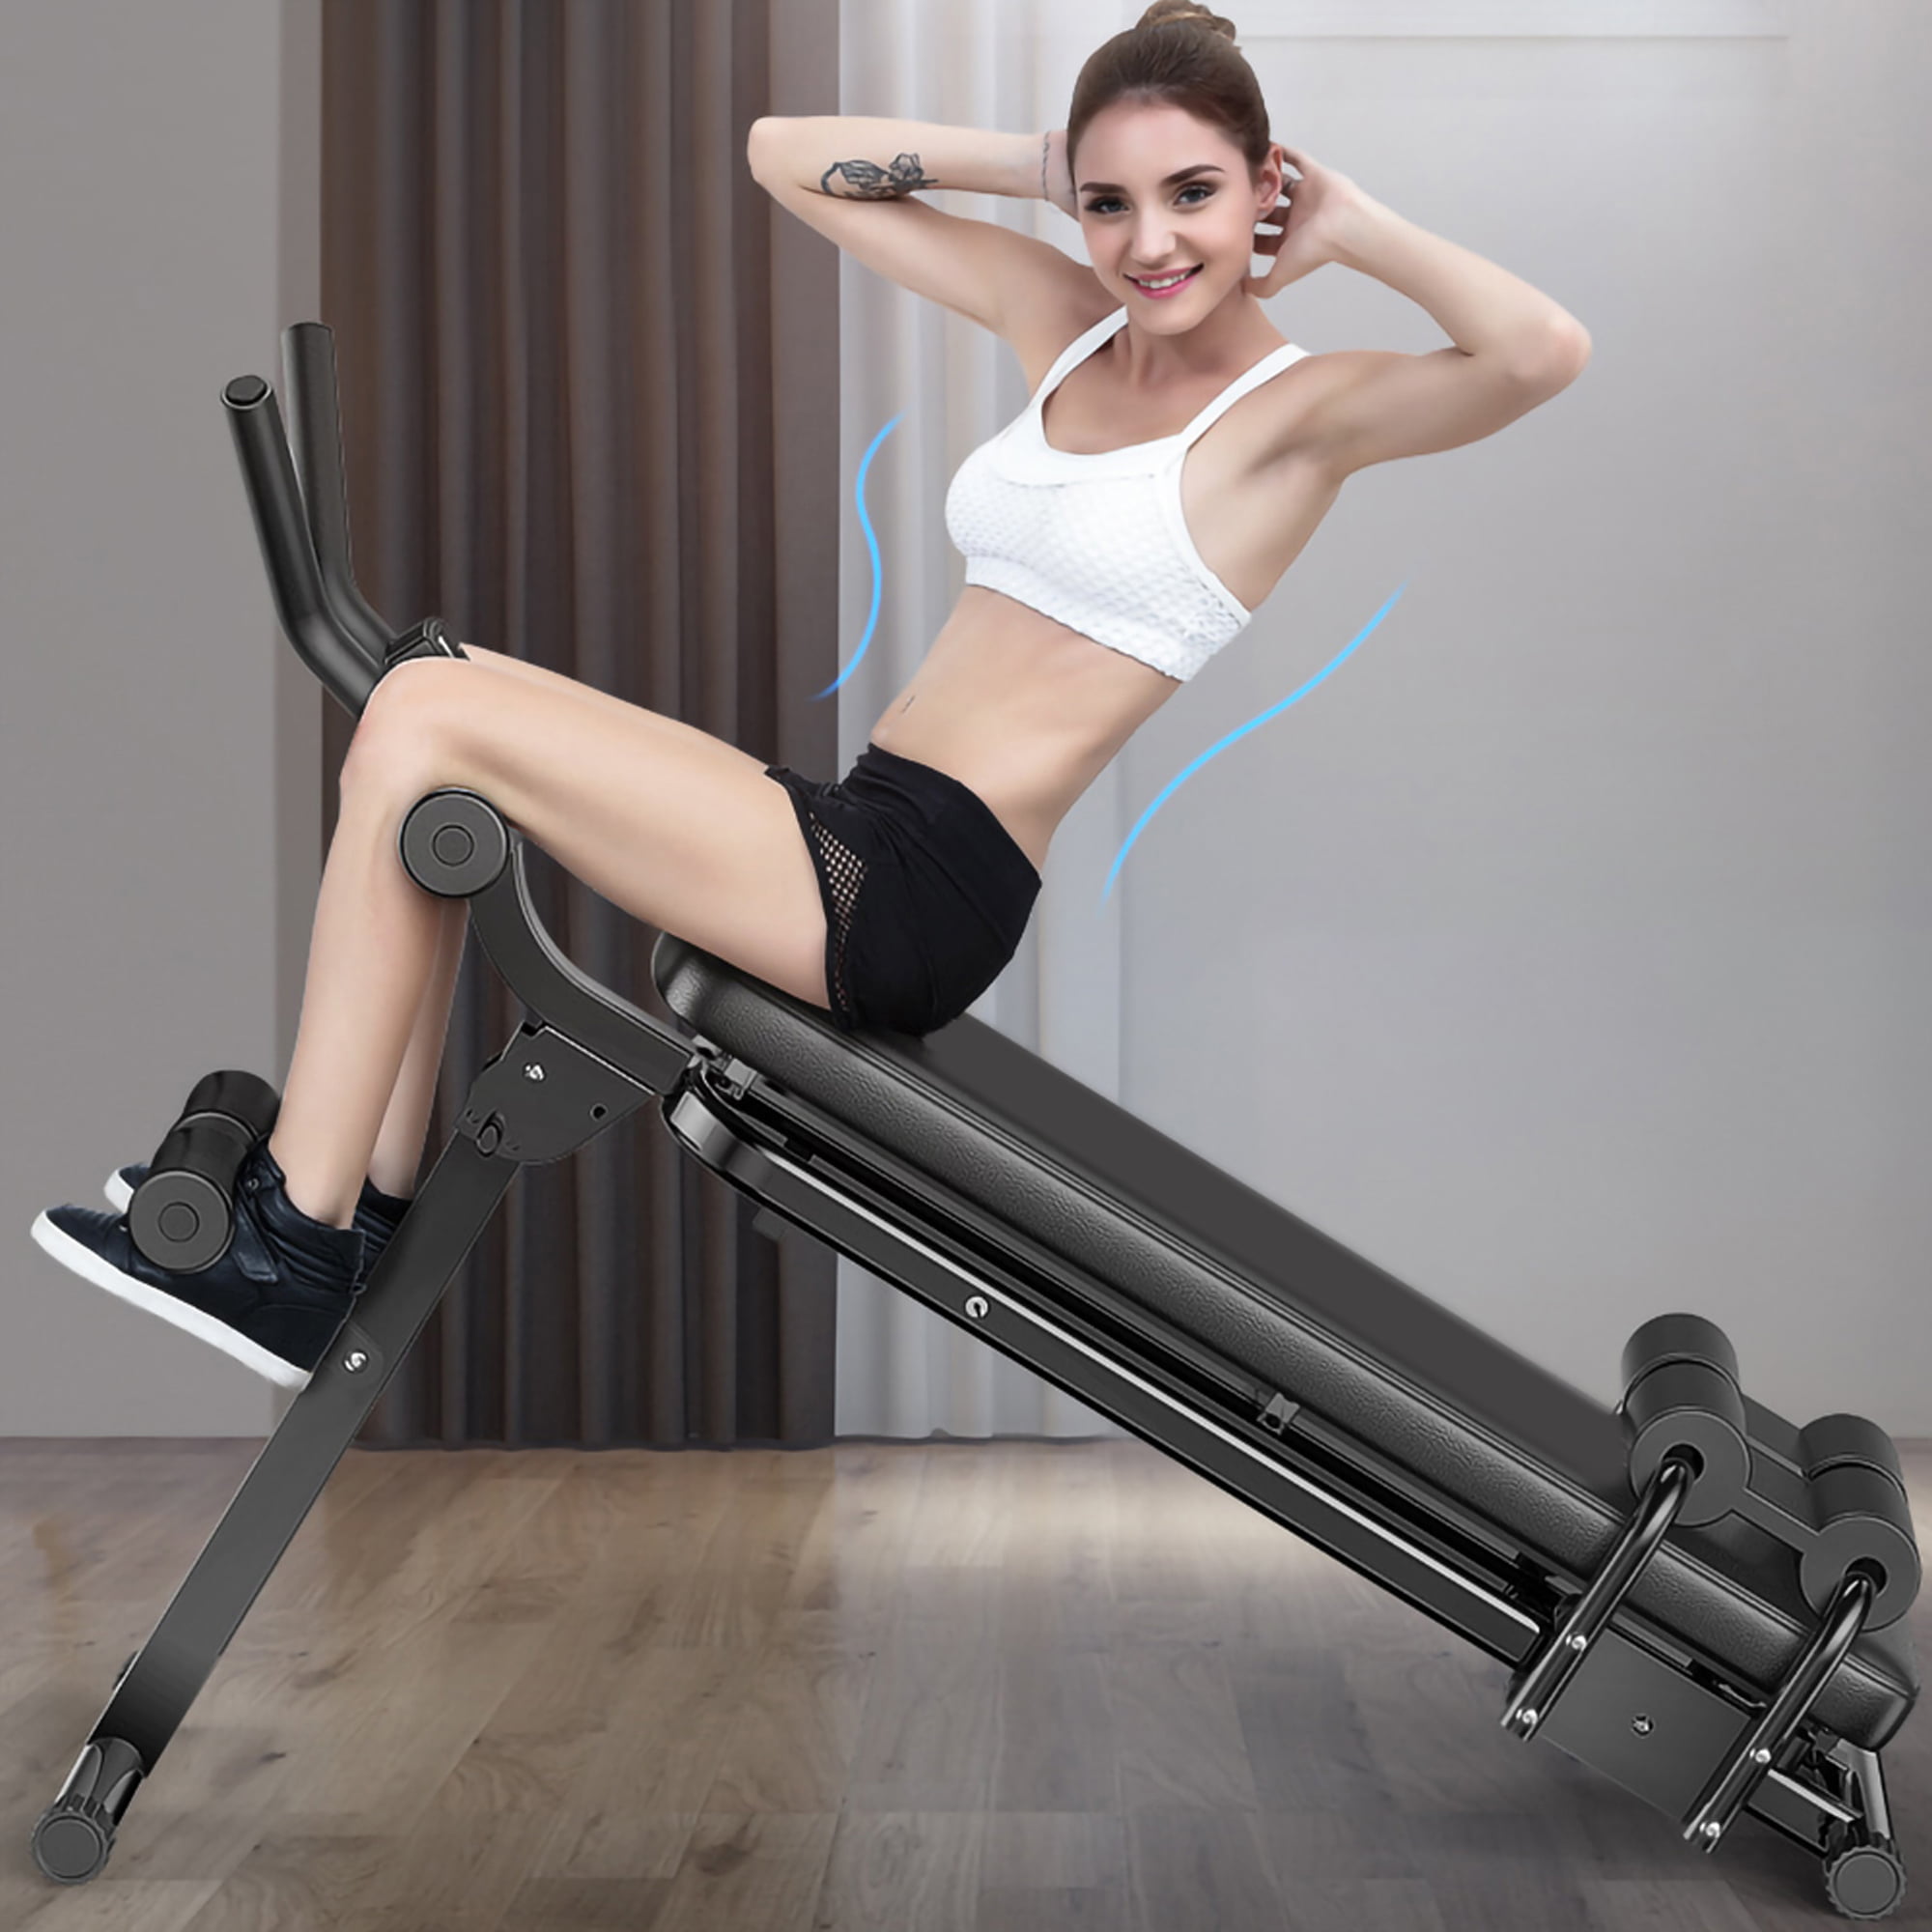 Foldable Sit Up Bench Abdominal Fitness Workout Home Gym Exercise Equipment US 